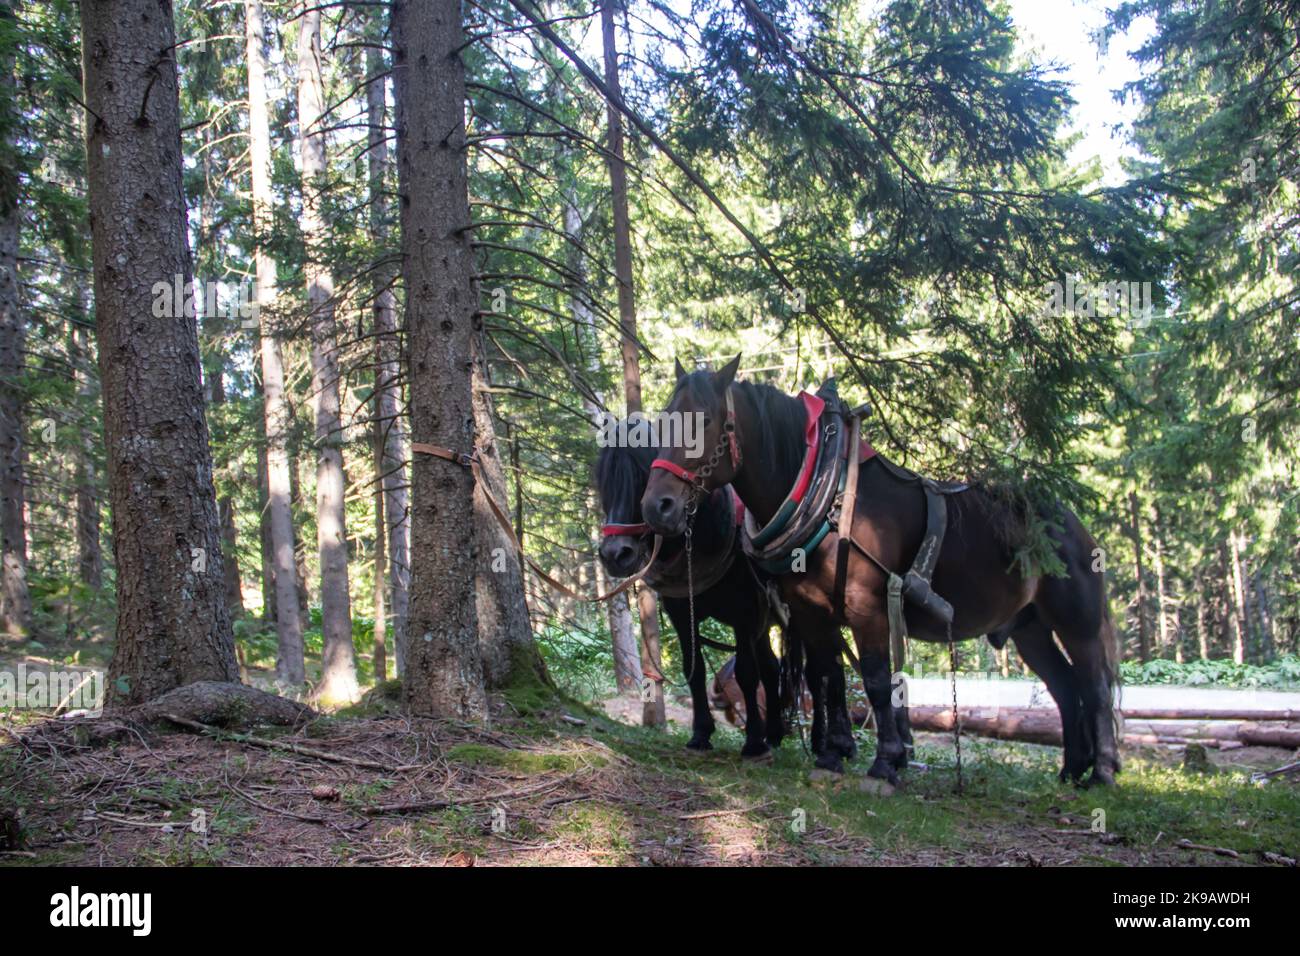 Domestic horses from farm at country side having rest after pulling freshly cut logs and timber from forest to local timber factory for production Stock Photo